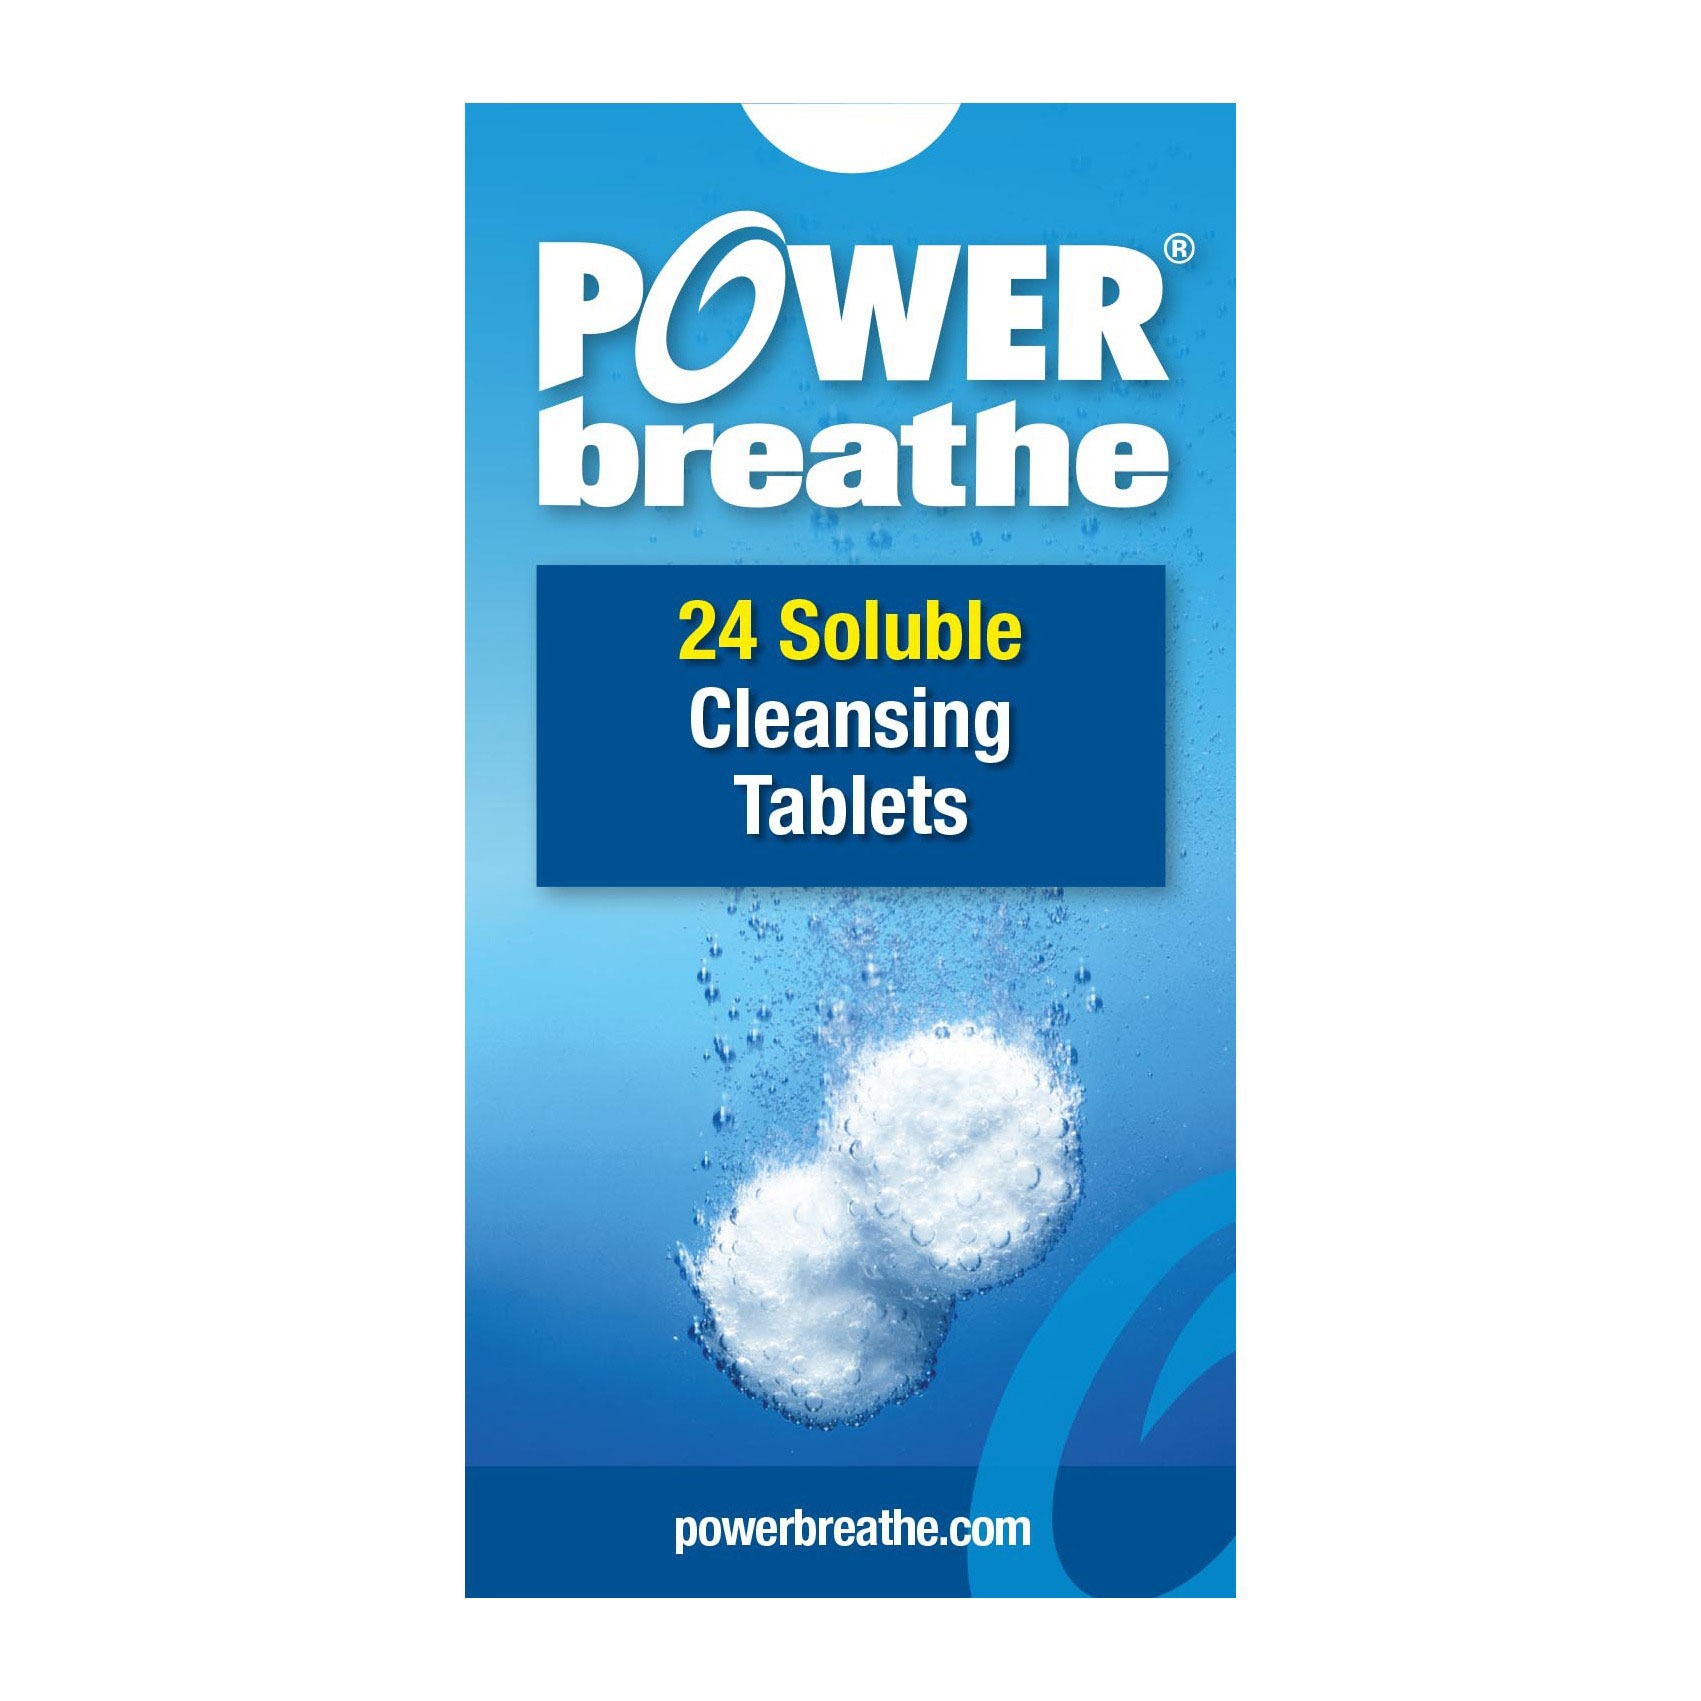 https://www.powerbreathe.com/wp-content/uploads/2019/10/Cleansing-Tablets.jpg